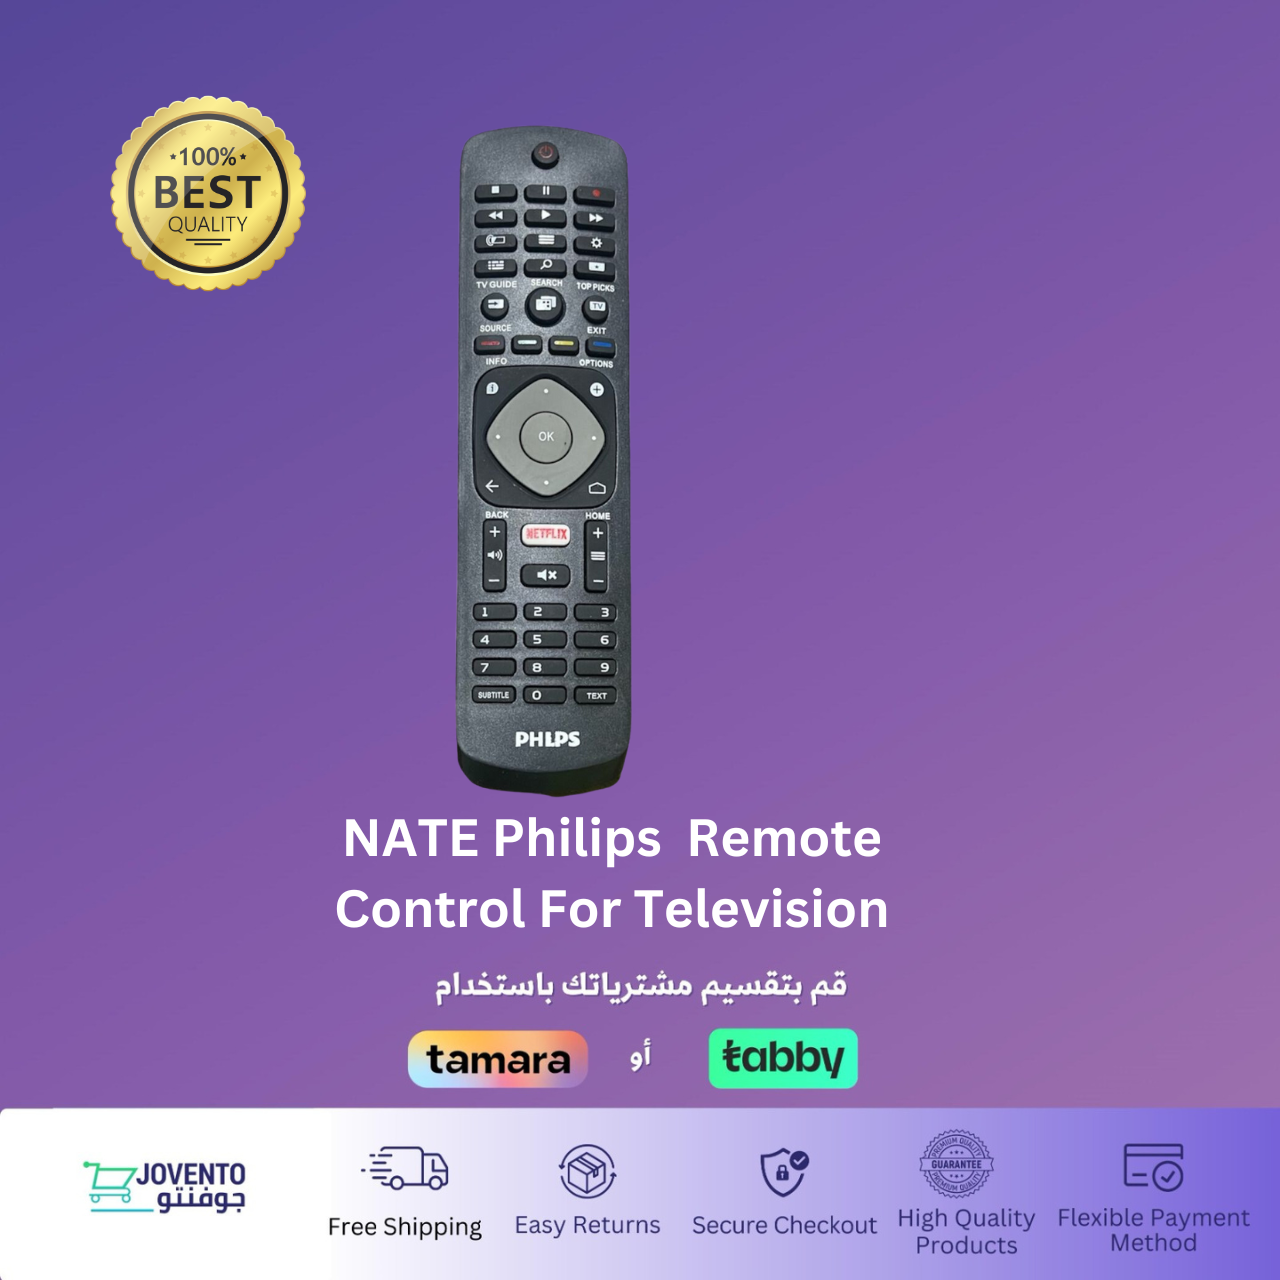 NATE Philips  Remote Control For Television